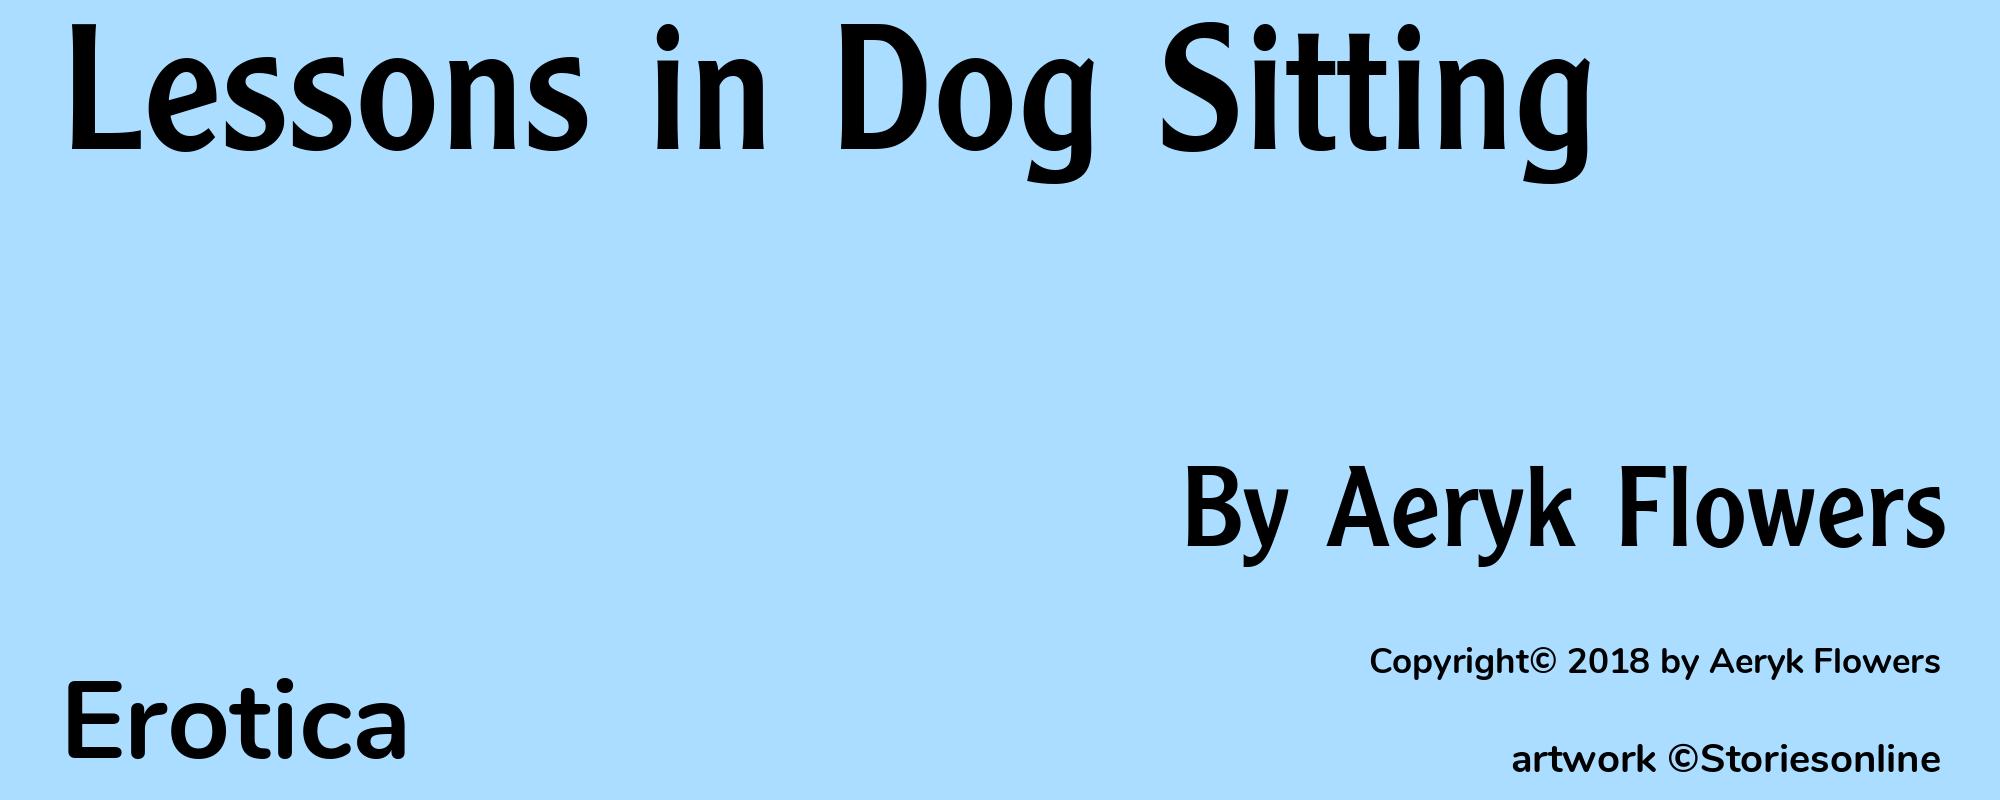 Lessons in Dog Sitting - Cover